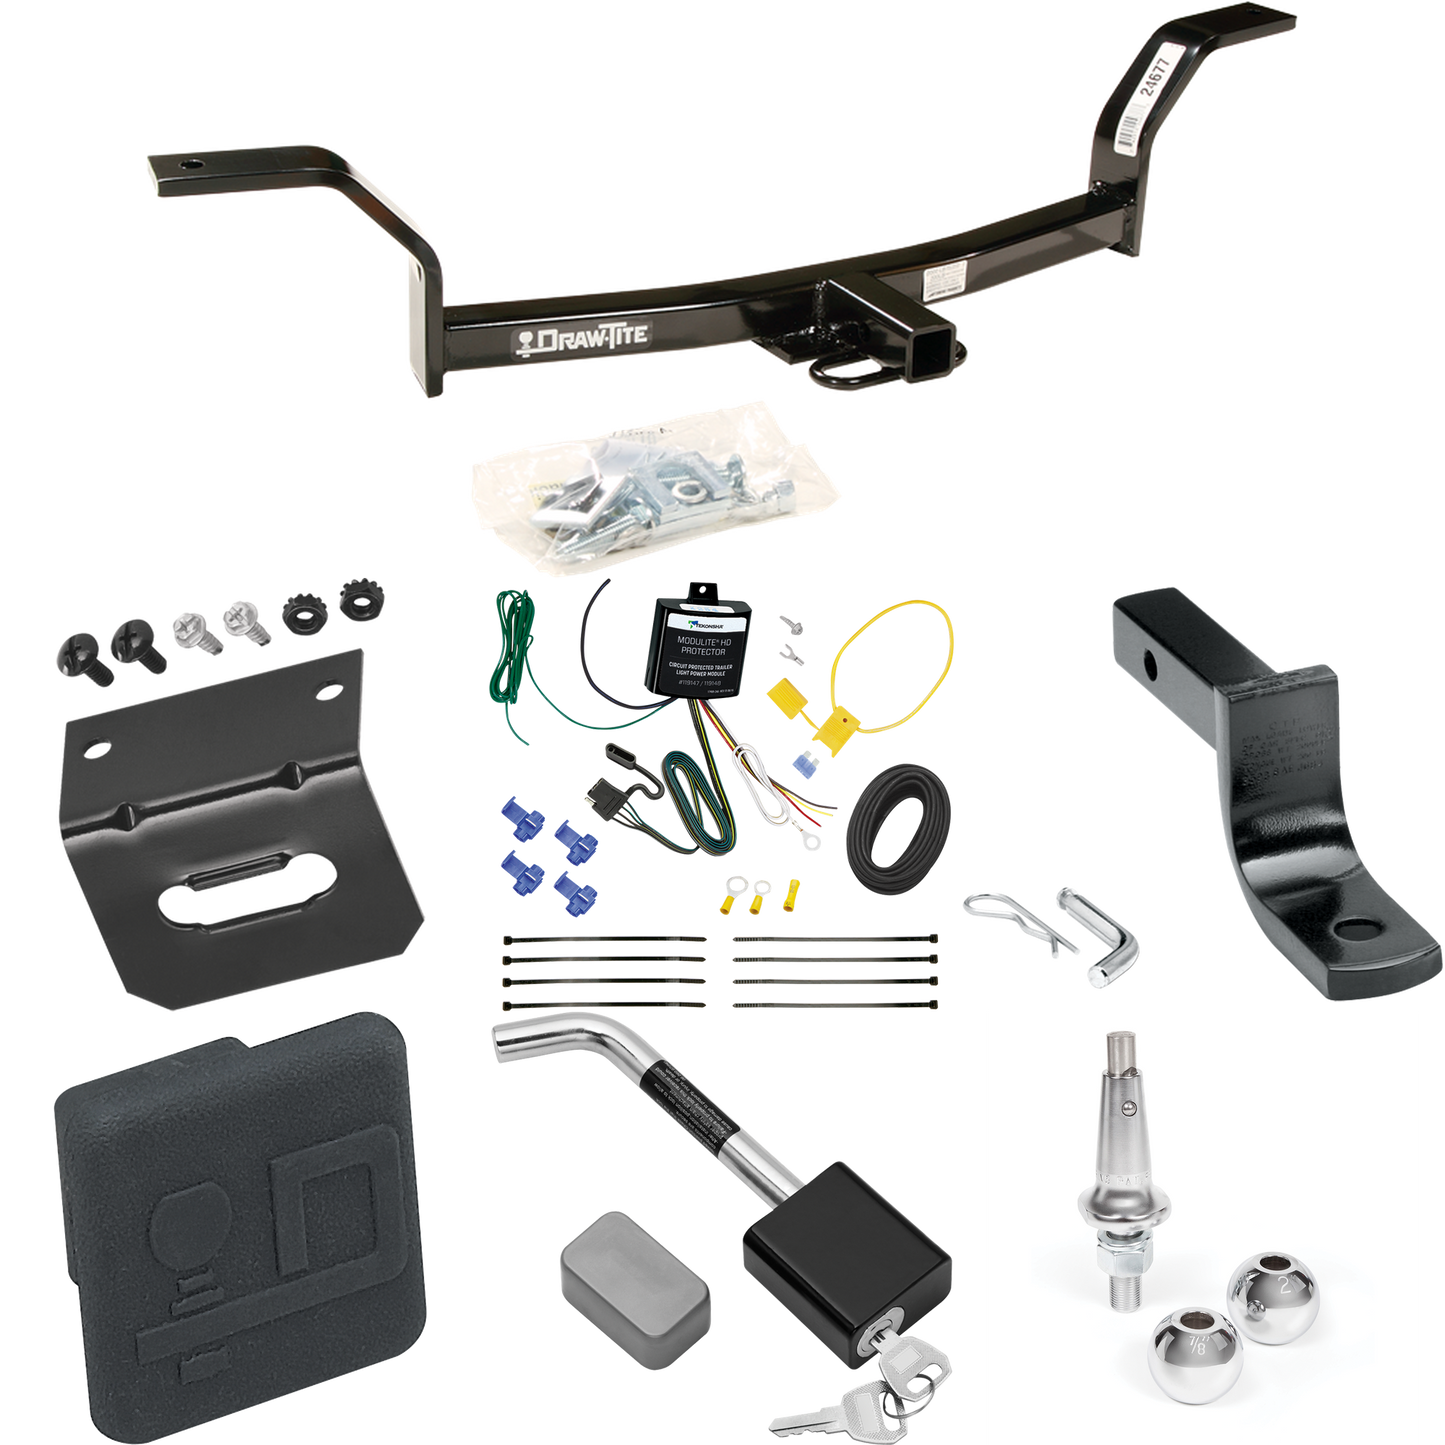 Fits 1992-2000 Honda Civic Trailer Hitch Tow PKG w/ 4-Flat Wiring Harness + Draw-Bar + Interchangeable 1-7/8" & 2" Balls + Wiring Bracket + Hitch Cover + Hitch Lock By Draw-Tite